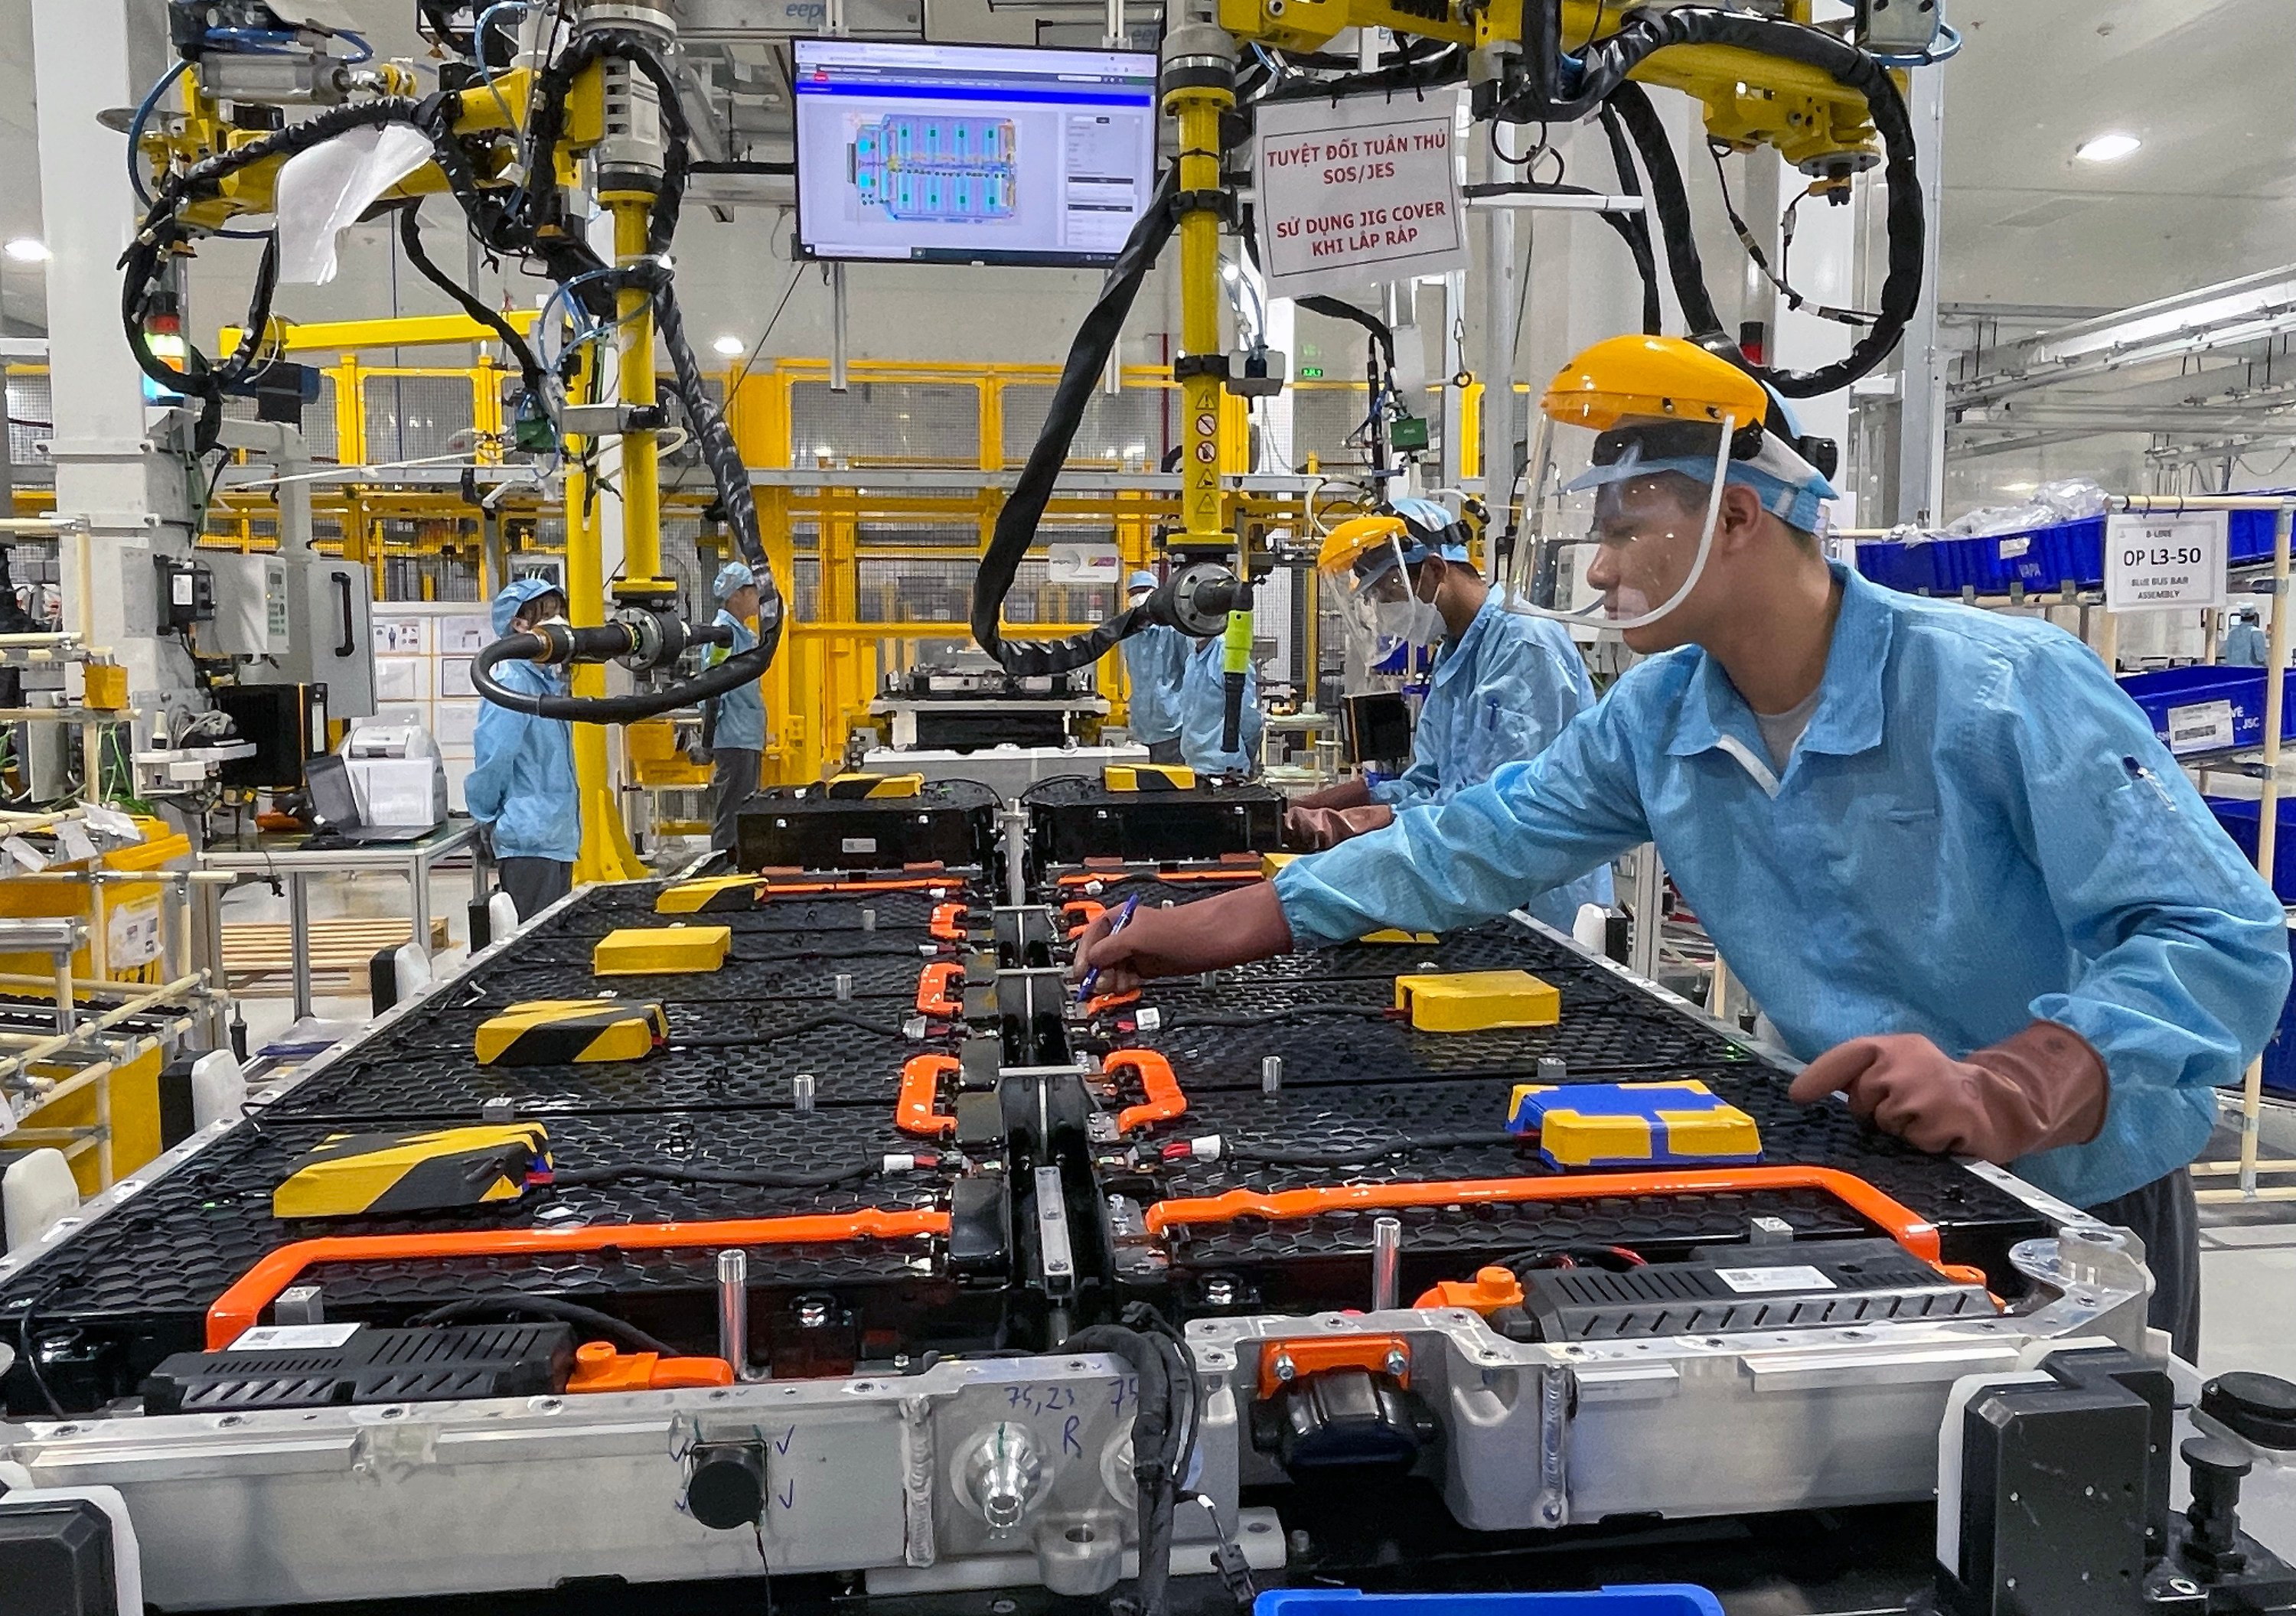 The automated Vinfast factory in Hai Phong where employees control the robots that put together electric vehicles, on July 26. Asean members like Vietnam are becoming more important parts of the electric vehicle and semiconductor supply chain. Photo: Getty Images